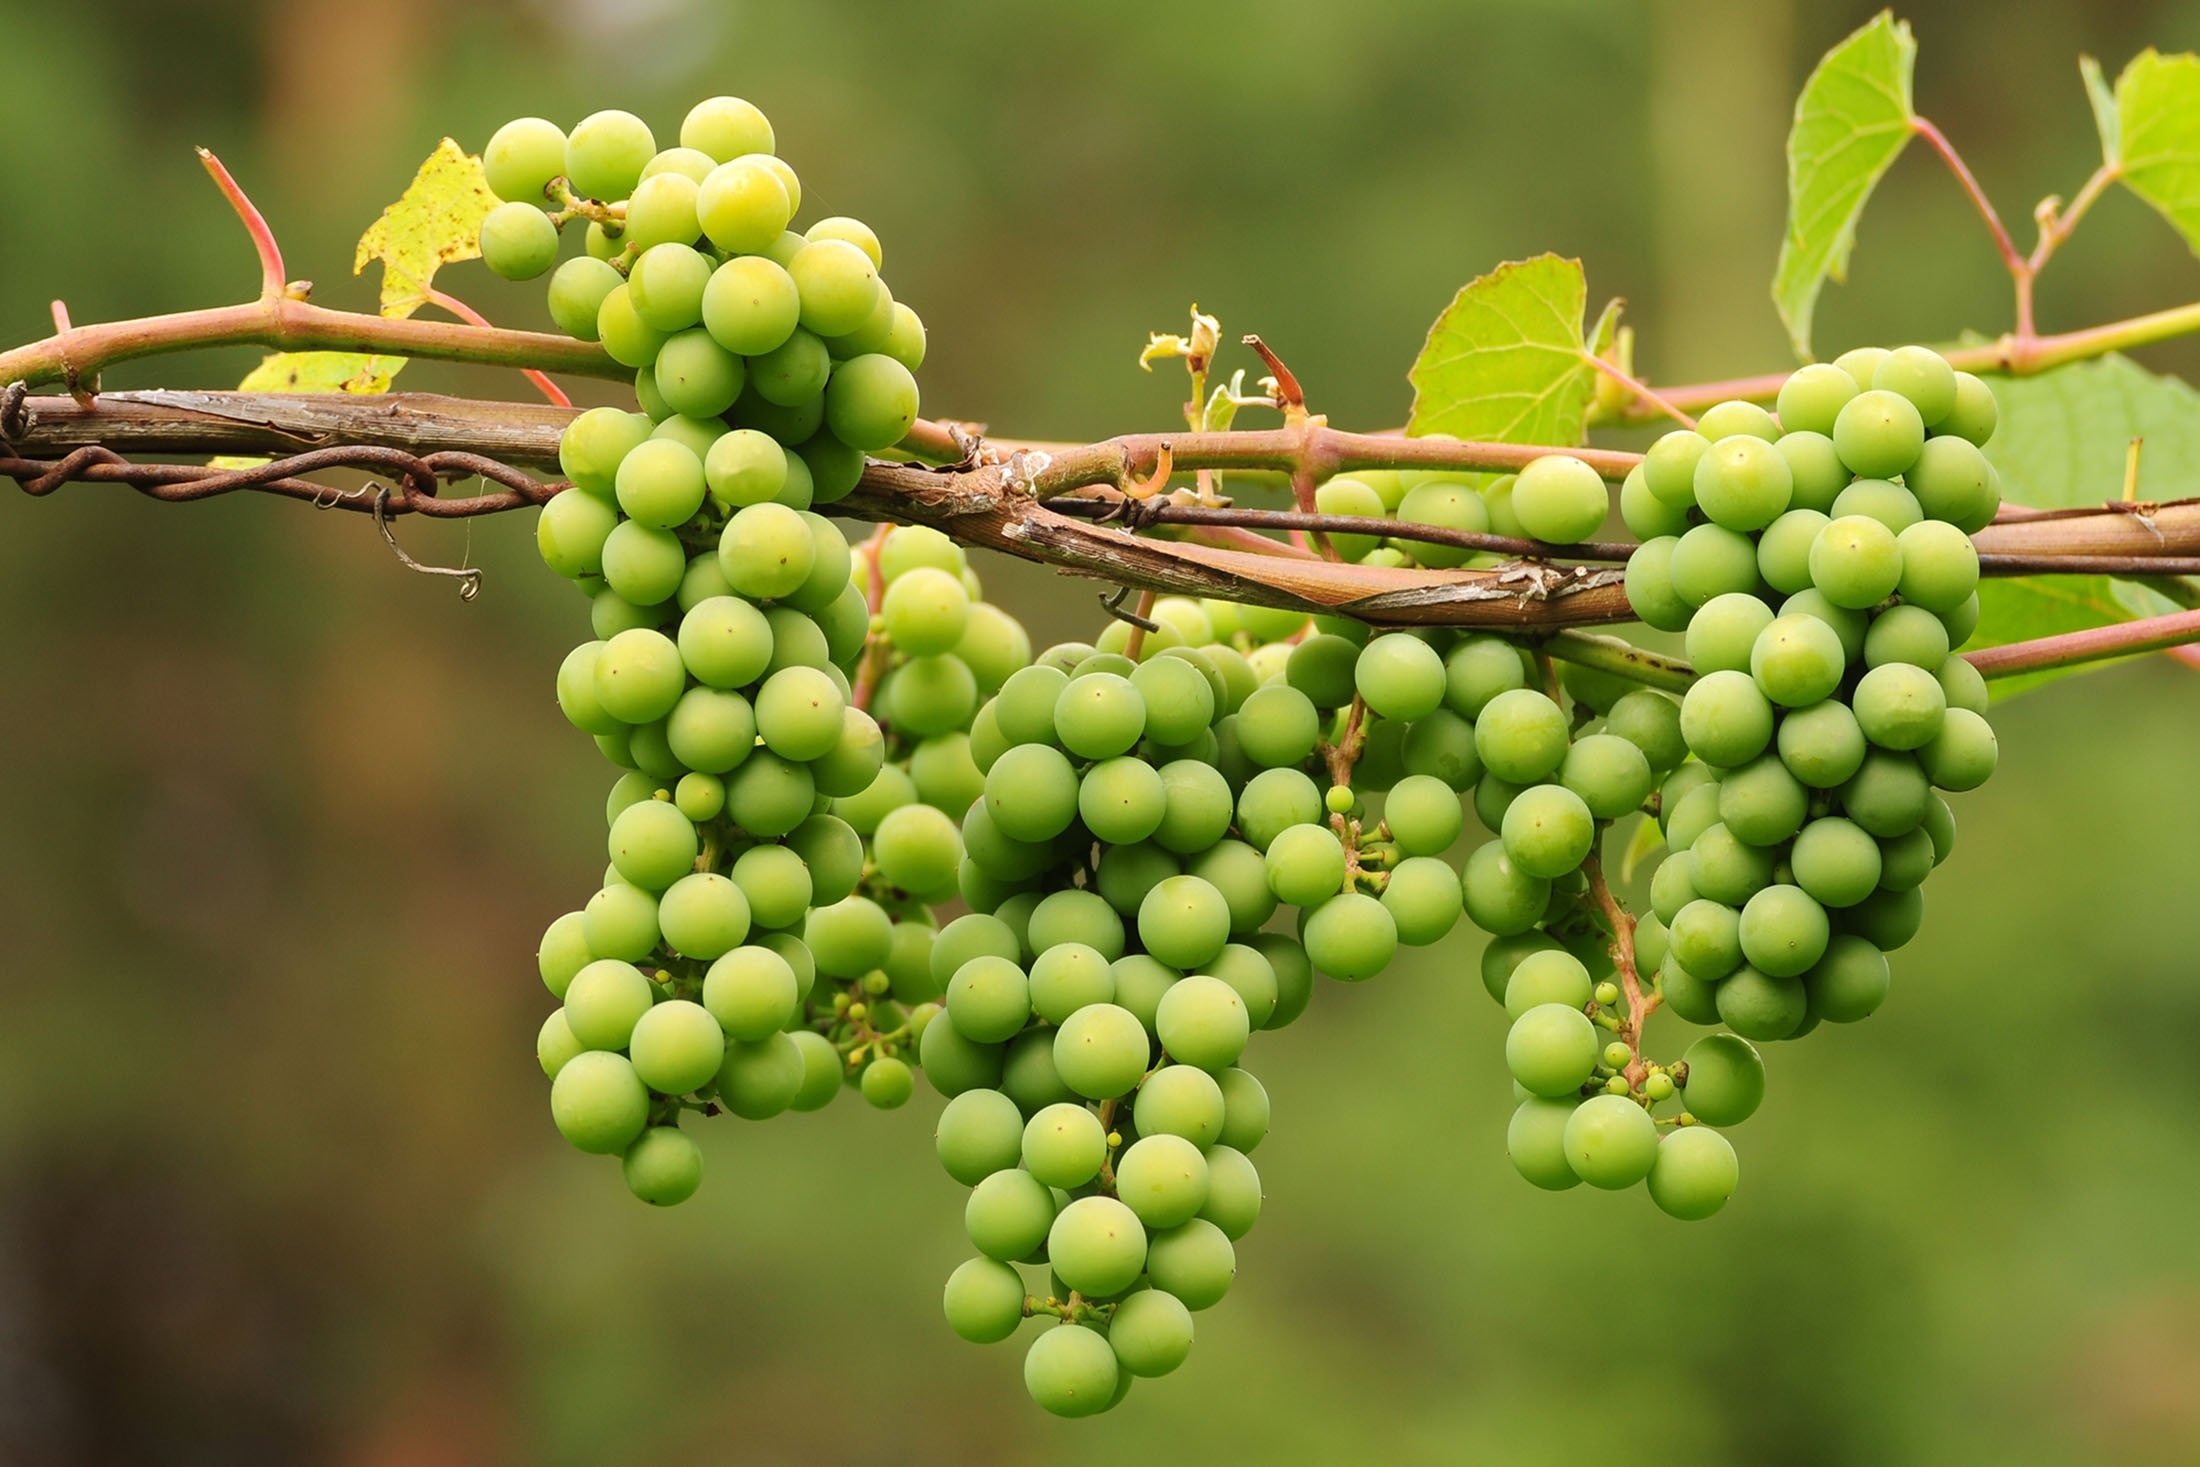 Koruk, or unripe grapes with a tart, sour taste, help to remove harmful toxins accumulated in the body.  (Photo by Shutterstock)